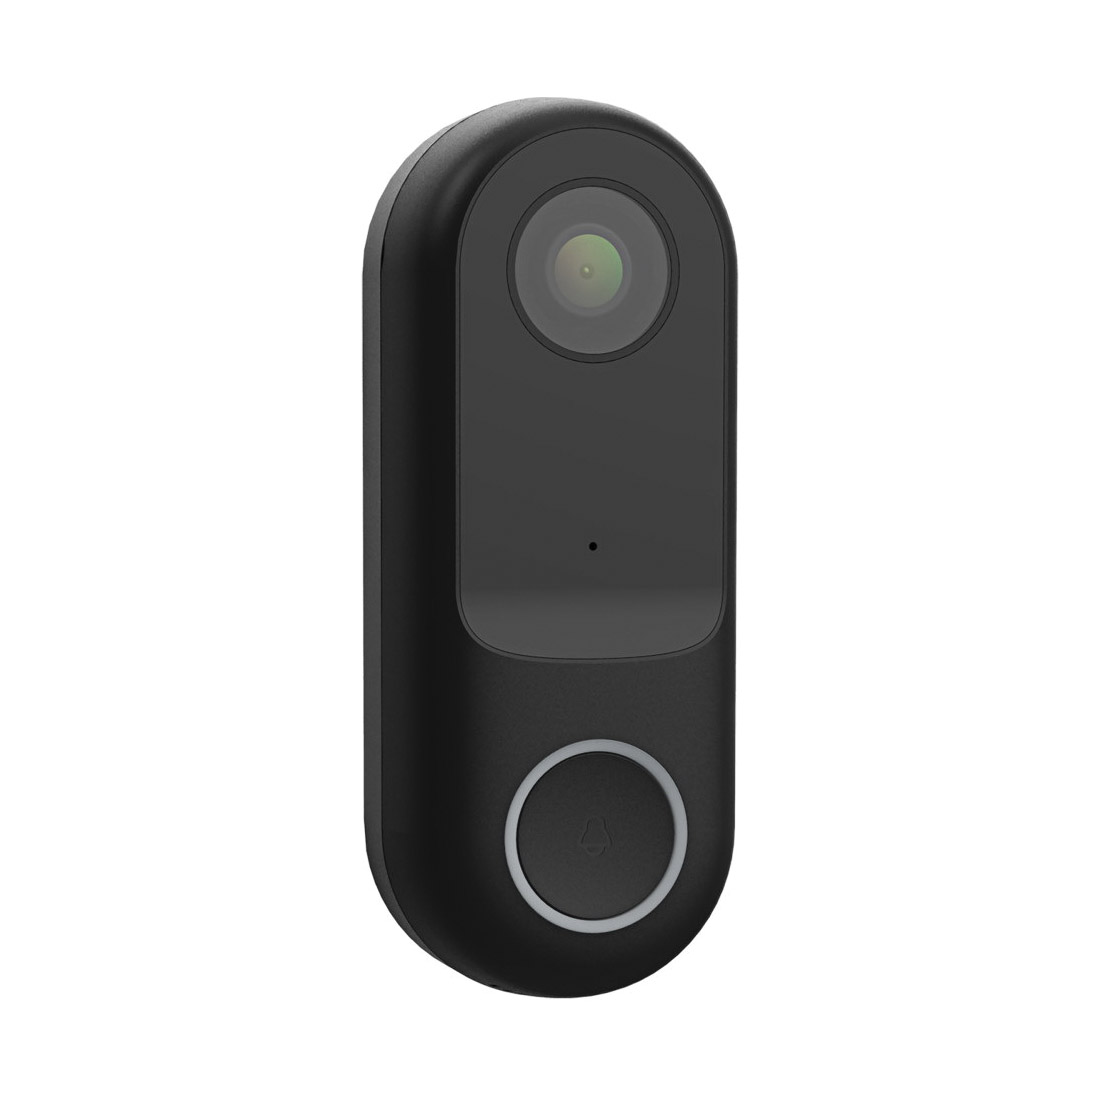 Feit Electric CAM/DOOR/WIFI Smart Doorbell Camera, 130 deg Viewing, Night Vision: 30 ft, Wi-Fi Connectivity: Yes - 1